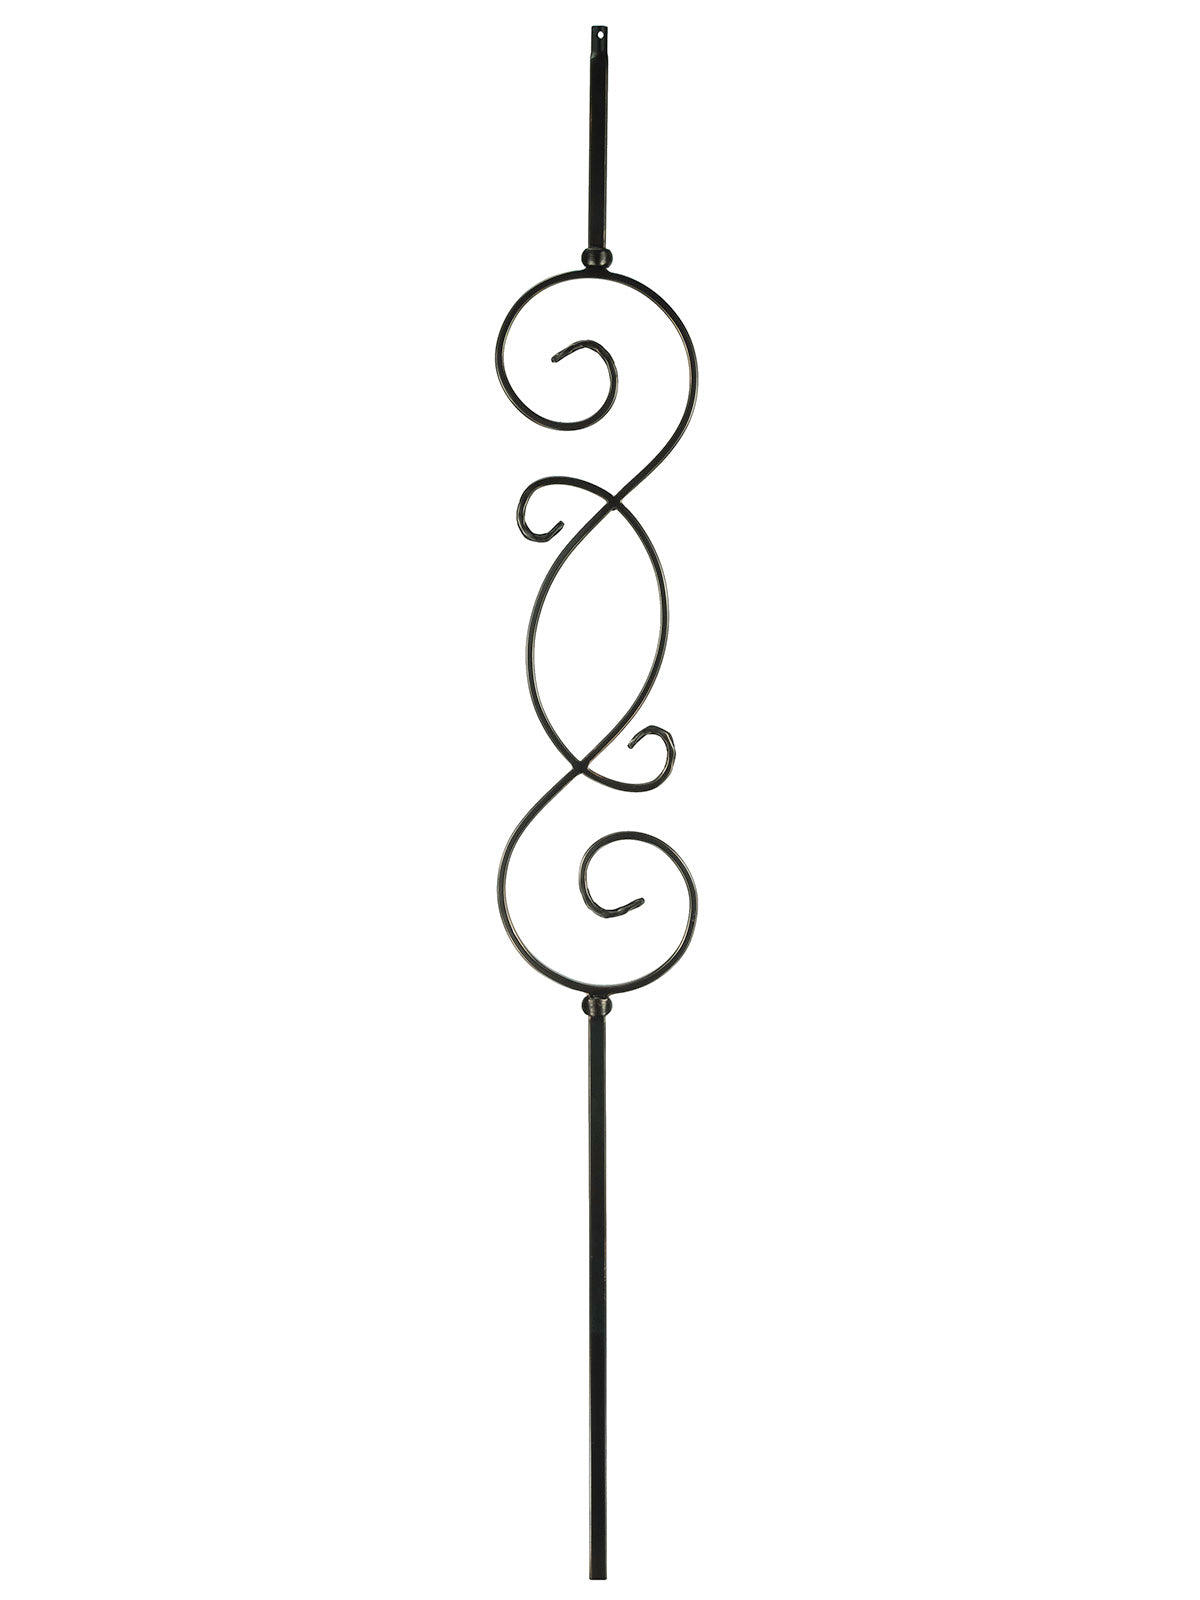 Iron Baluster T57 - 1/2" Square (Scroll - S Scroll)